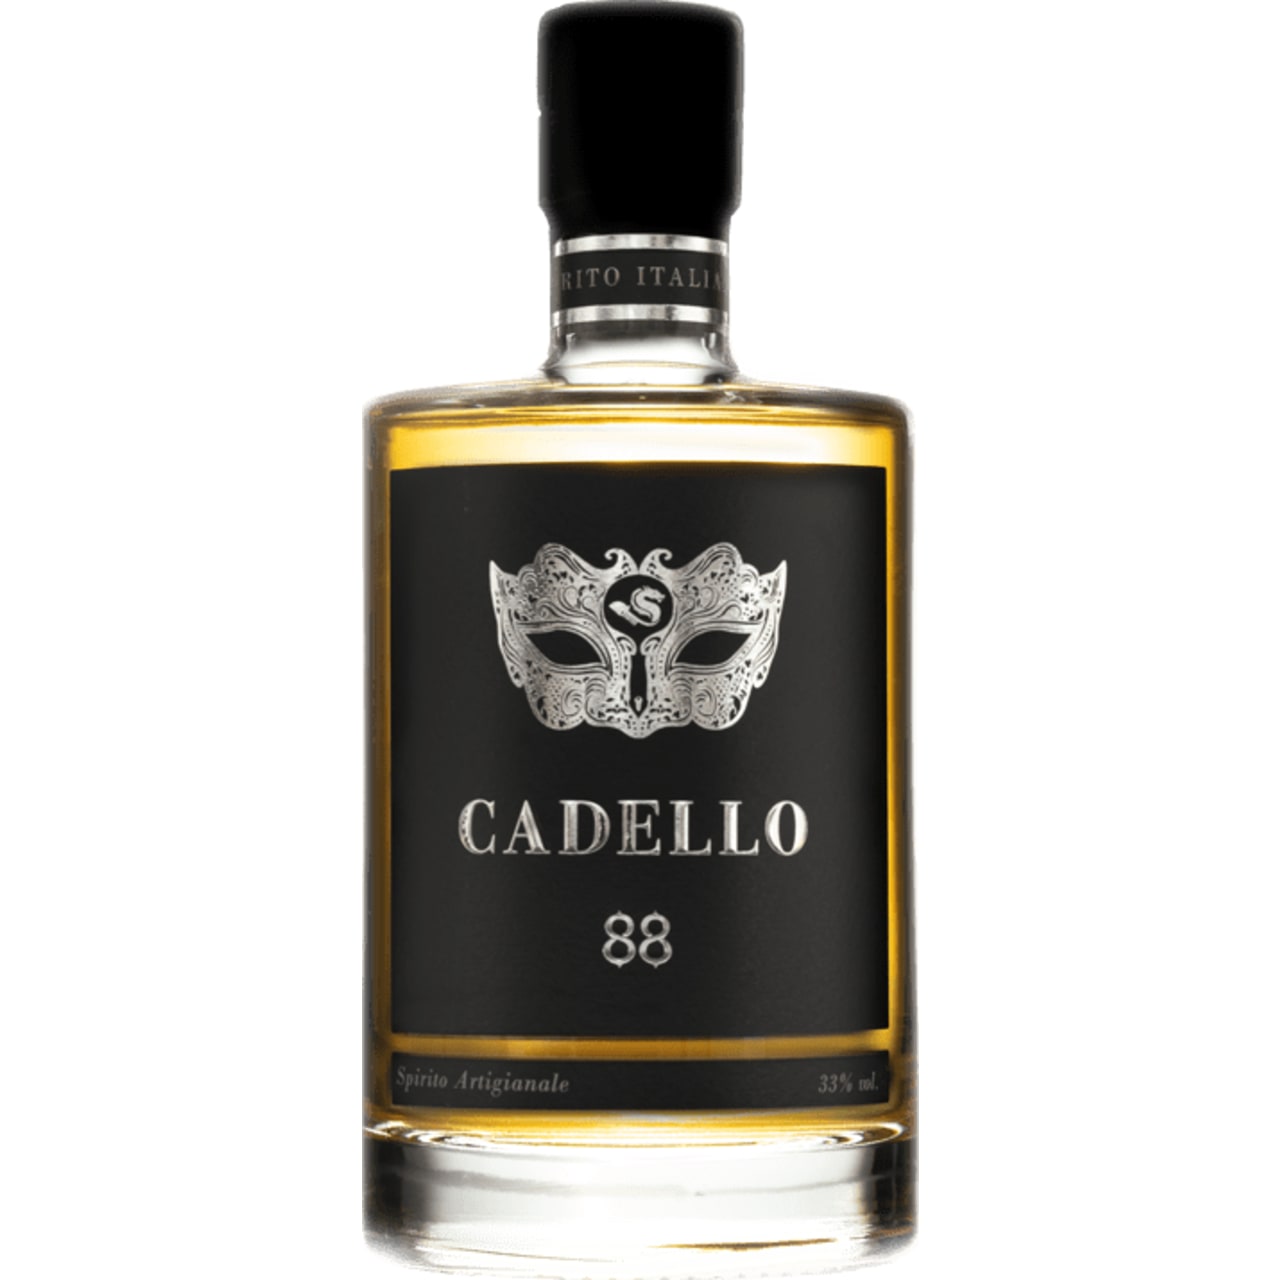 Cadello’s long finish unveils flavors of coffee, chocolate, cocoa, star anise and vanilla, with hints of hazelnut, mint, caramel and toffee.